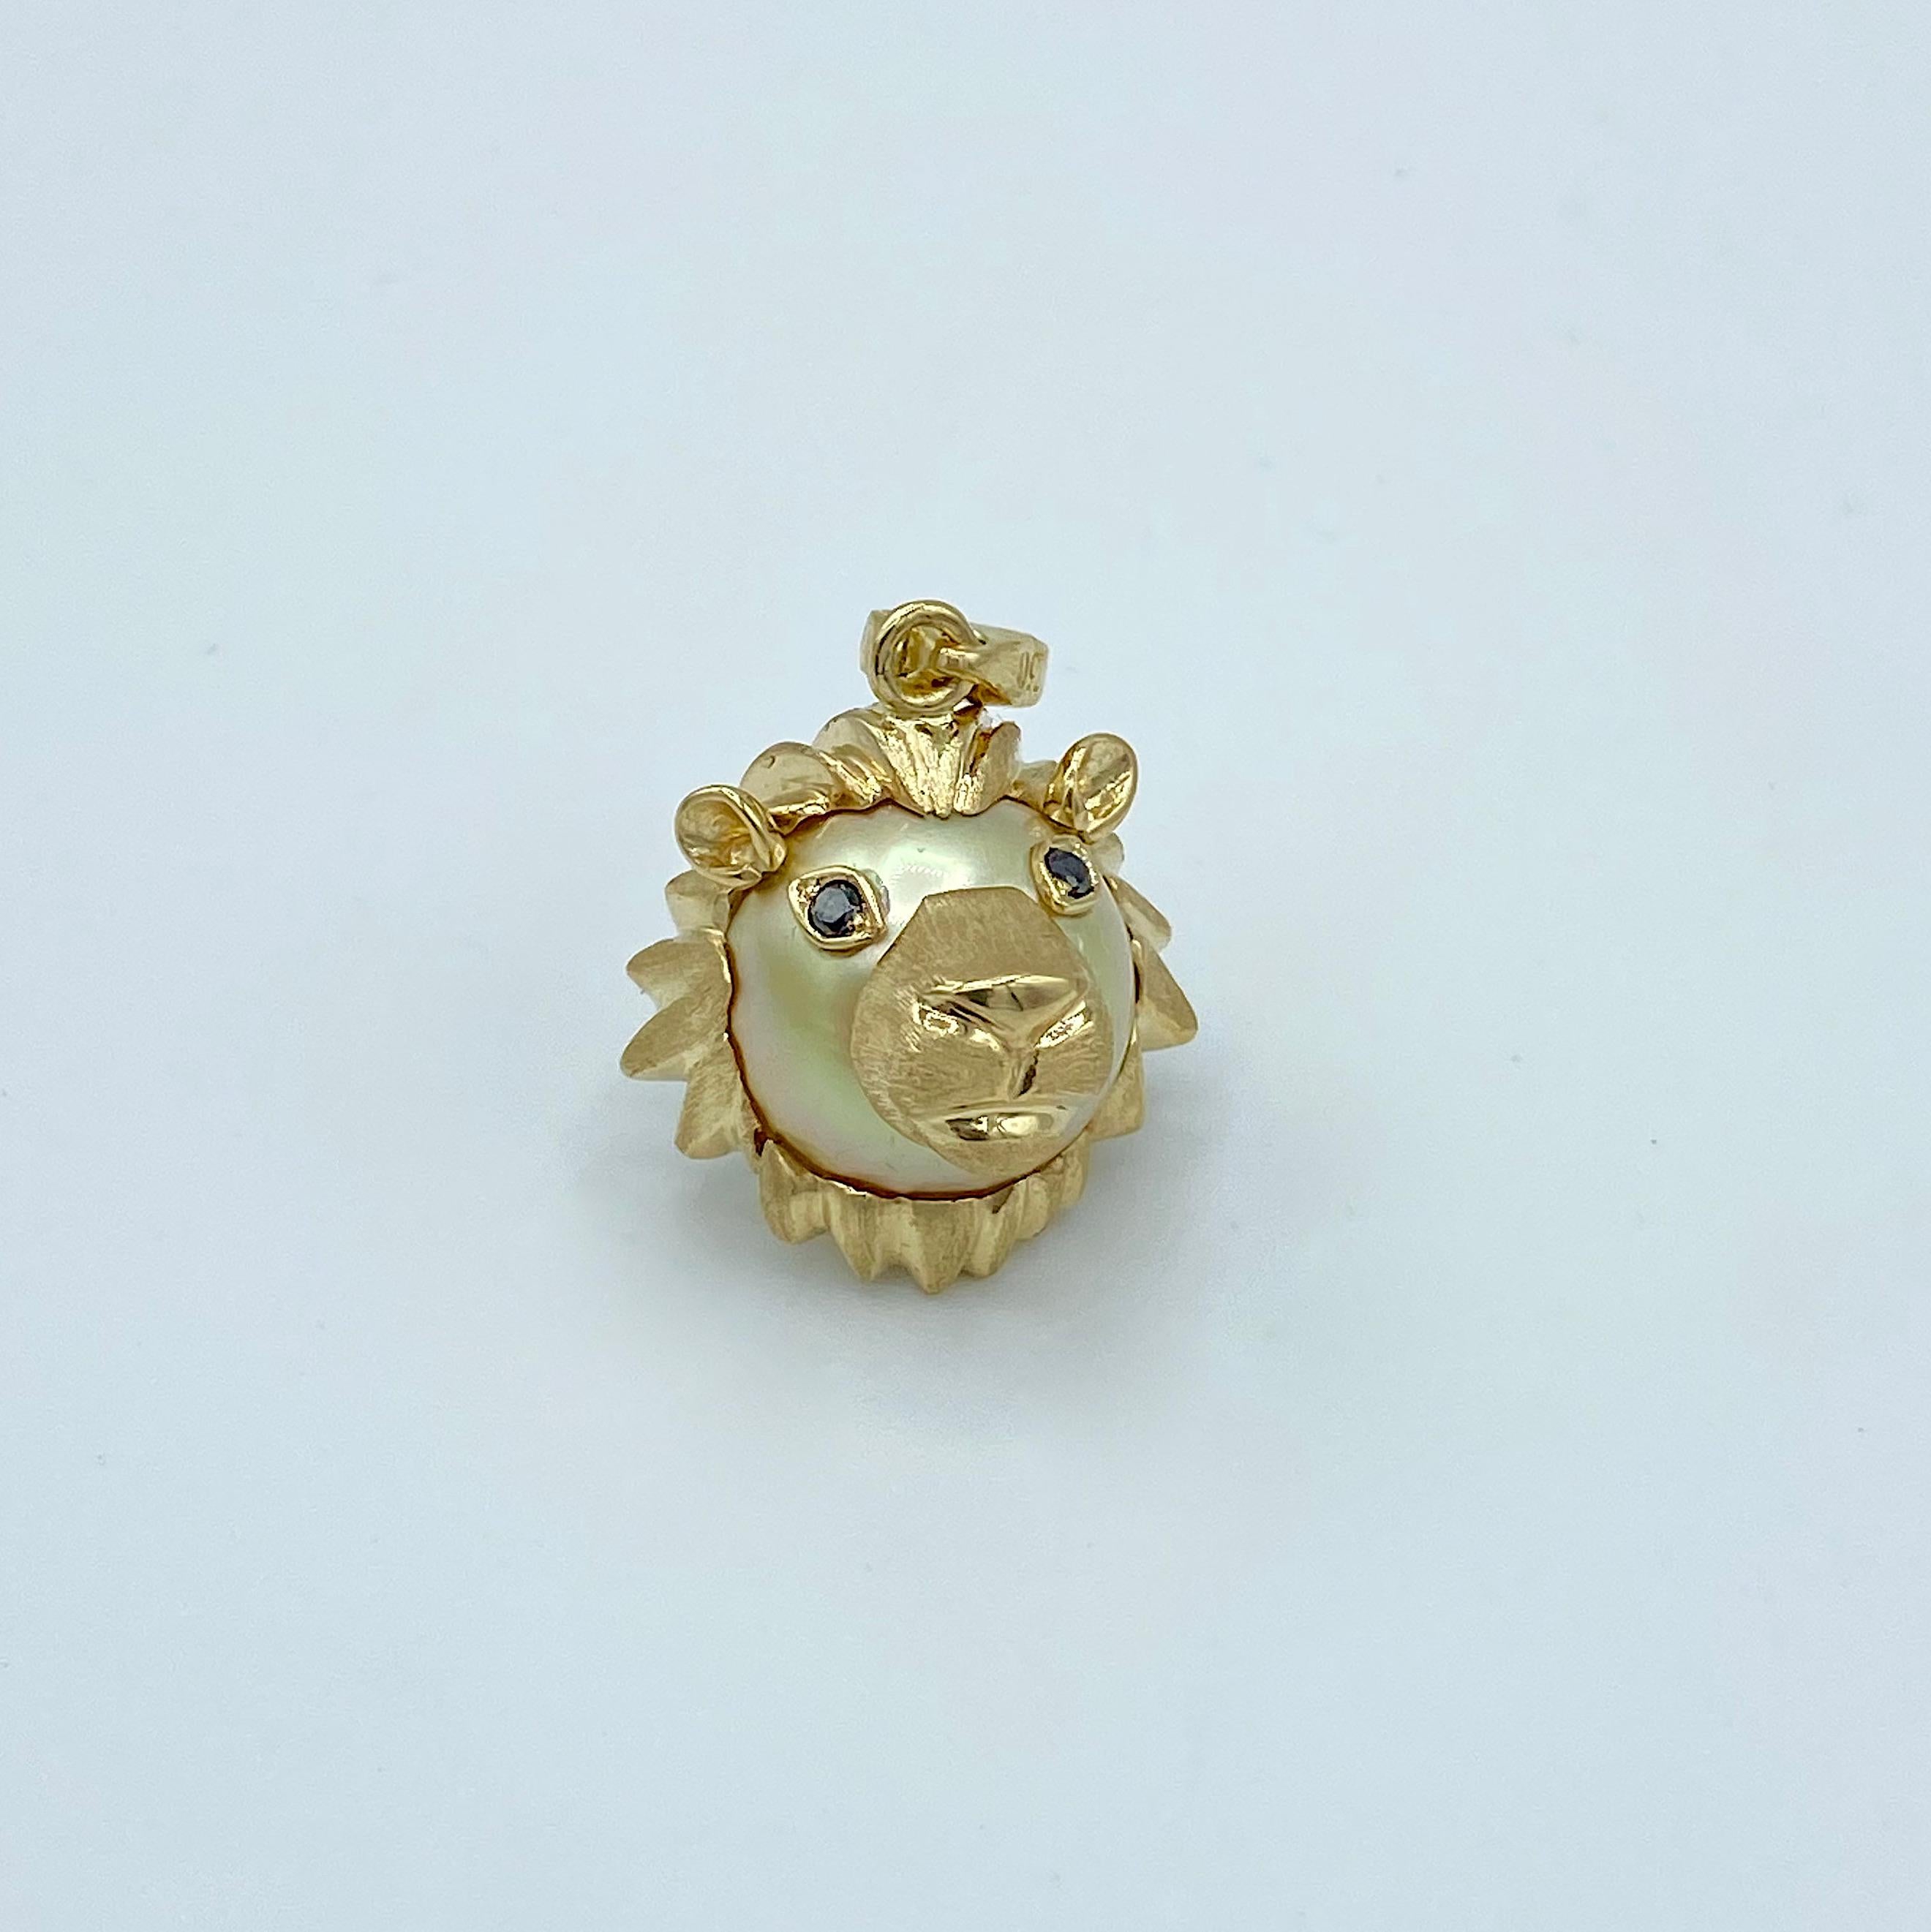 Lion Black Diamond Australian Gold Pearl 18Kt Gold Pendant Necklace or Charm
I used a yellow Australian pearl to create a lion face. I made the mane around the head, nose, mouth and ears in yellow gold. The almond-shaped eyes are set with two round